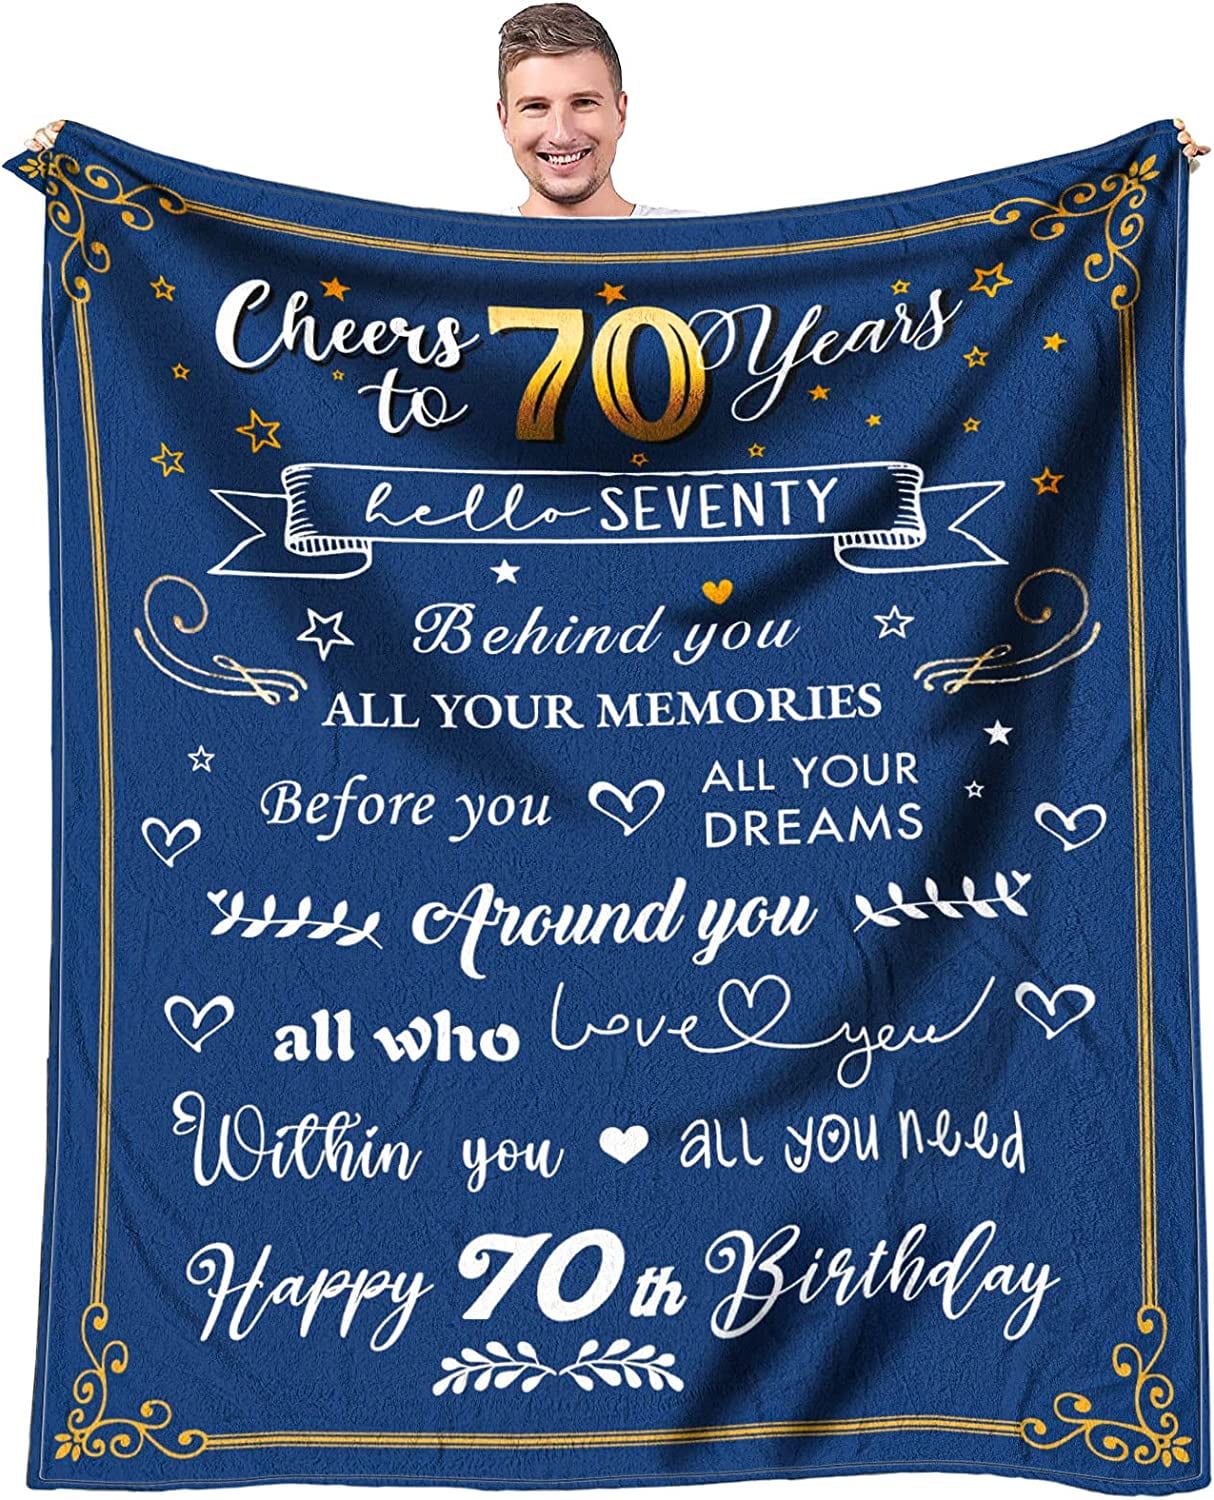 70th Birthday Gifts That Are Meaningful  Memorable  All Gifts Considered